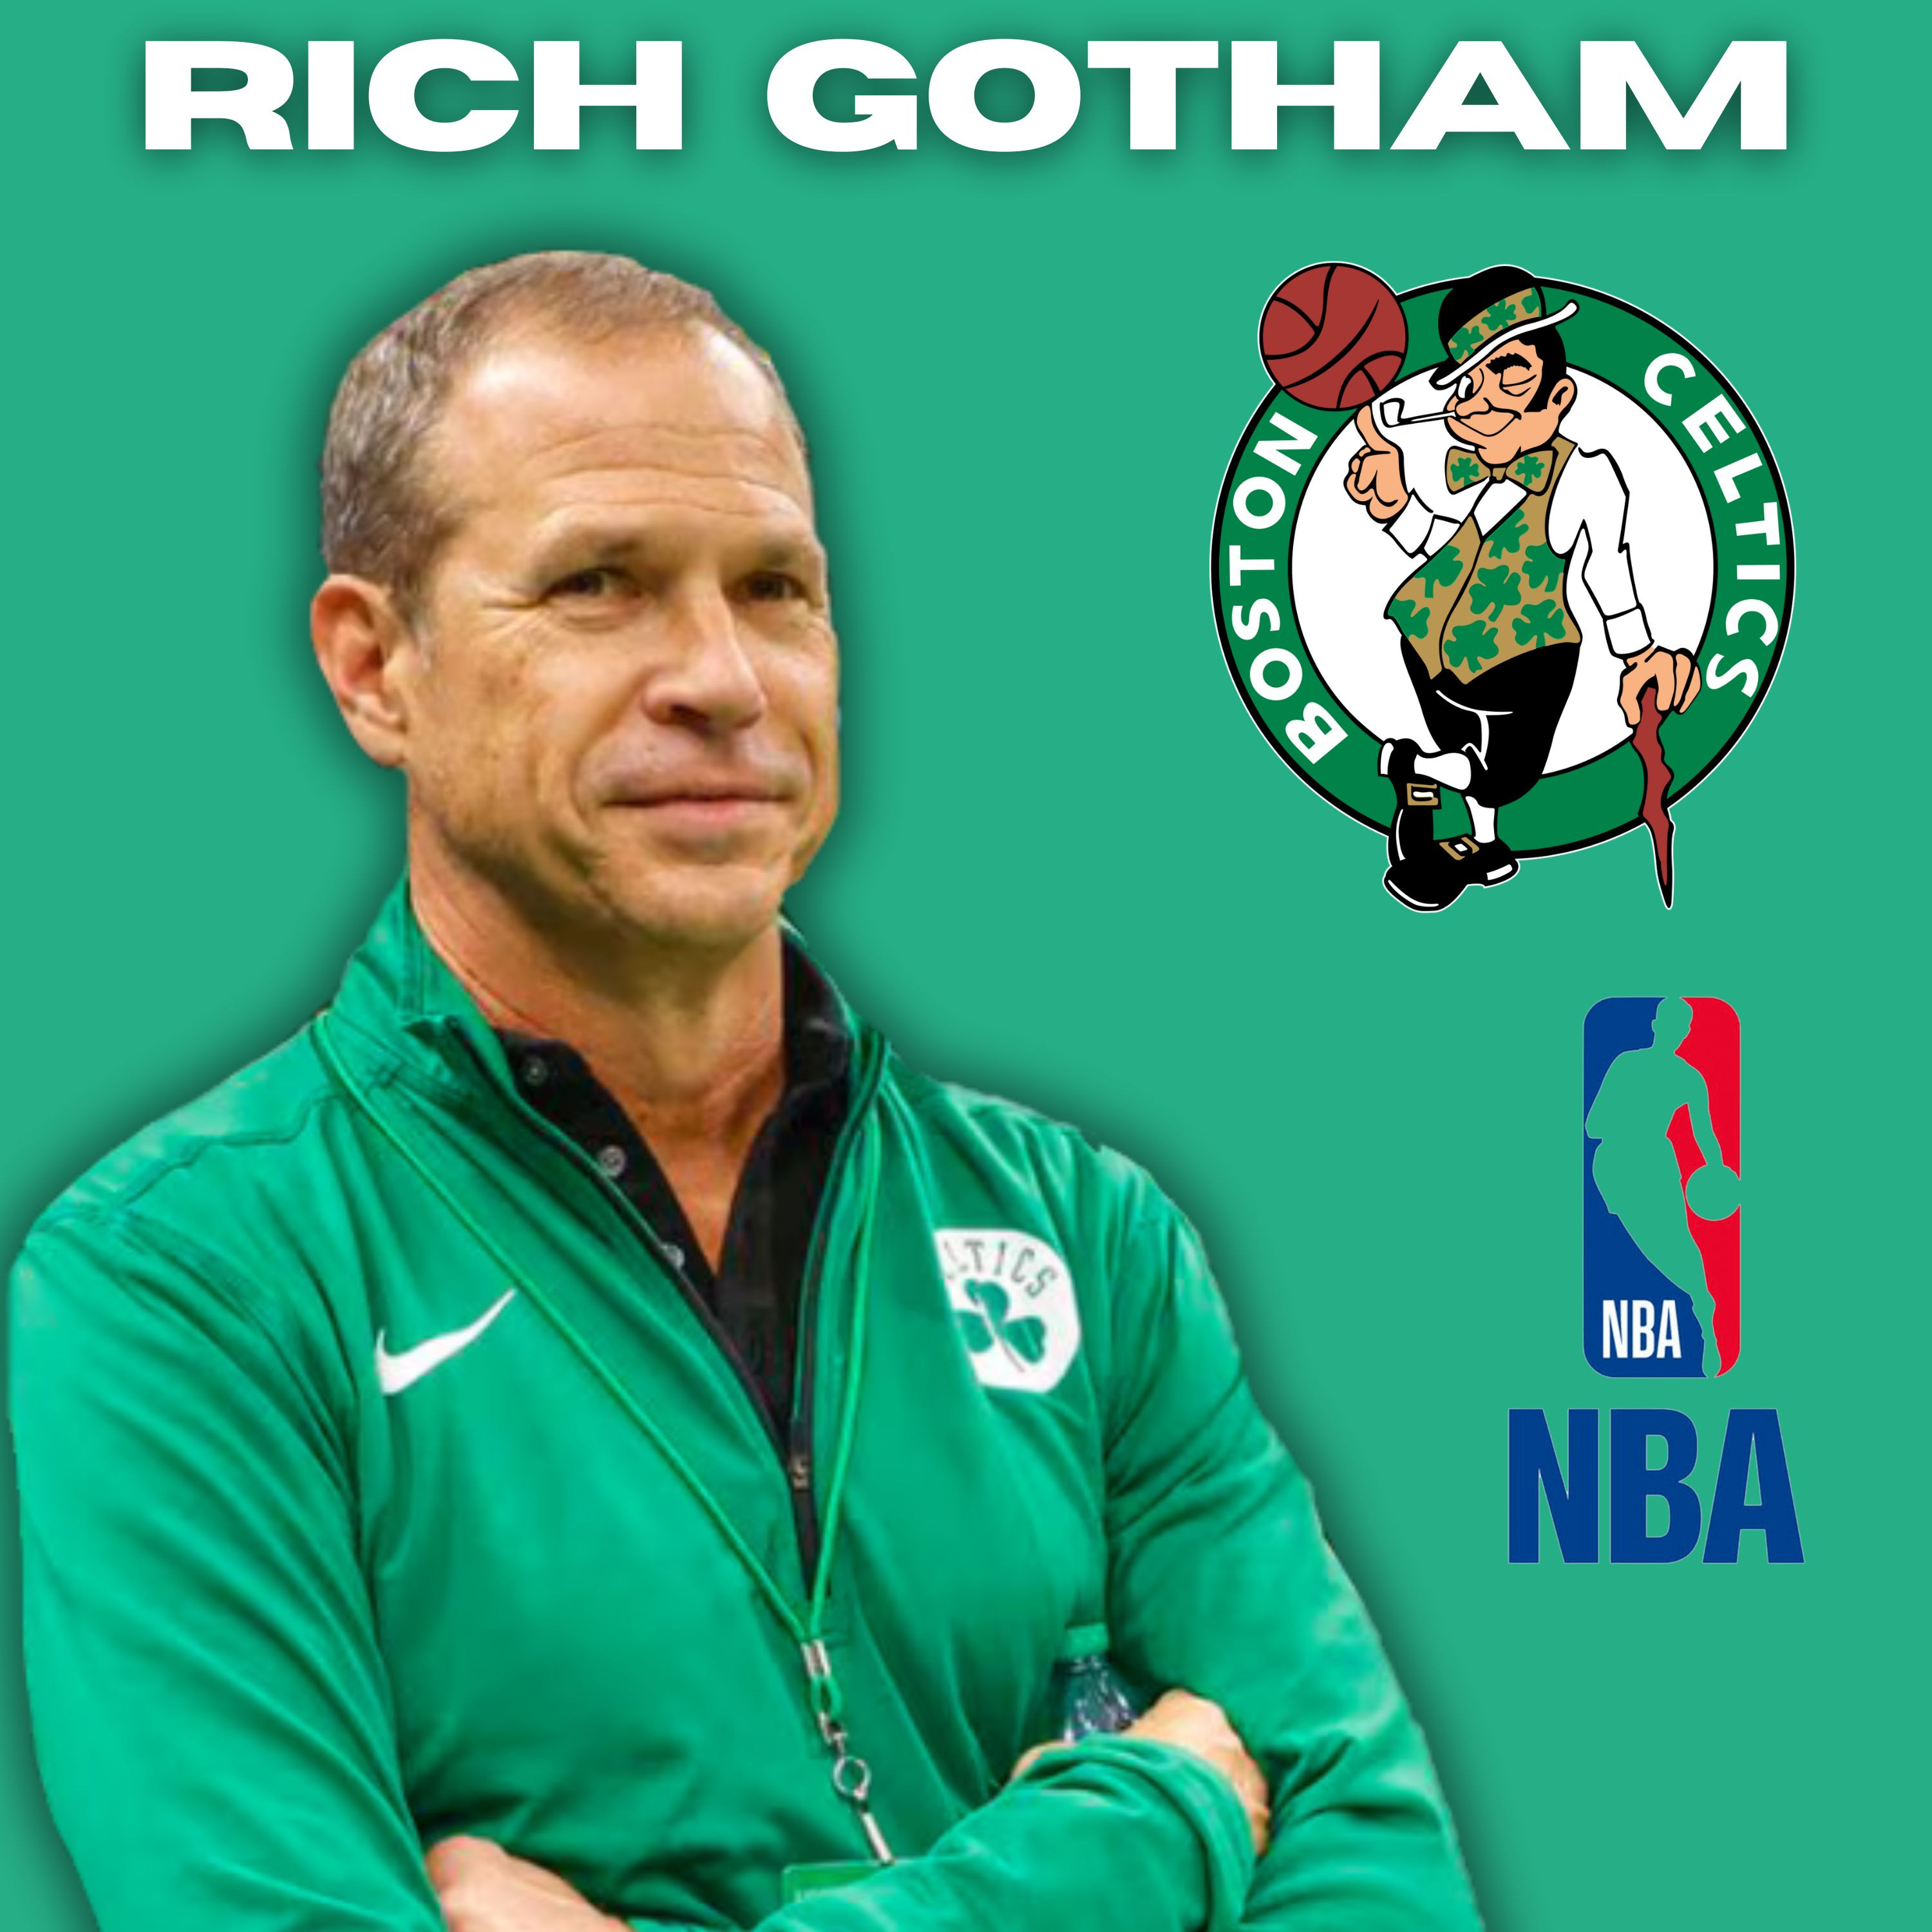 The Boston Celtics’ Other Playbook: Business Insights from President Rich Gotham